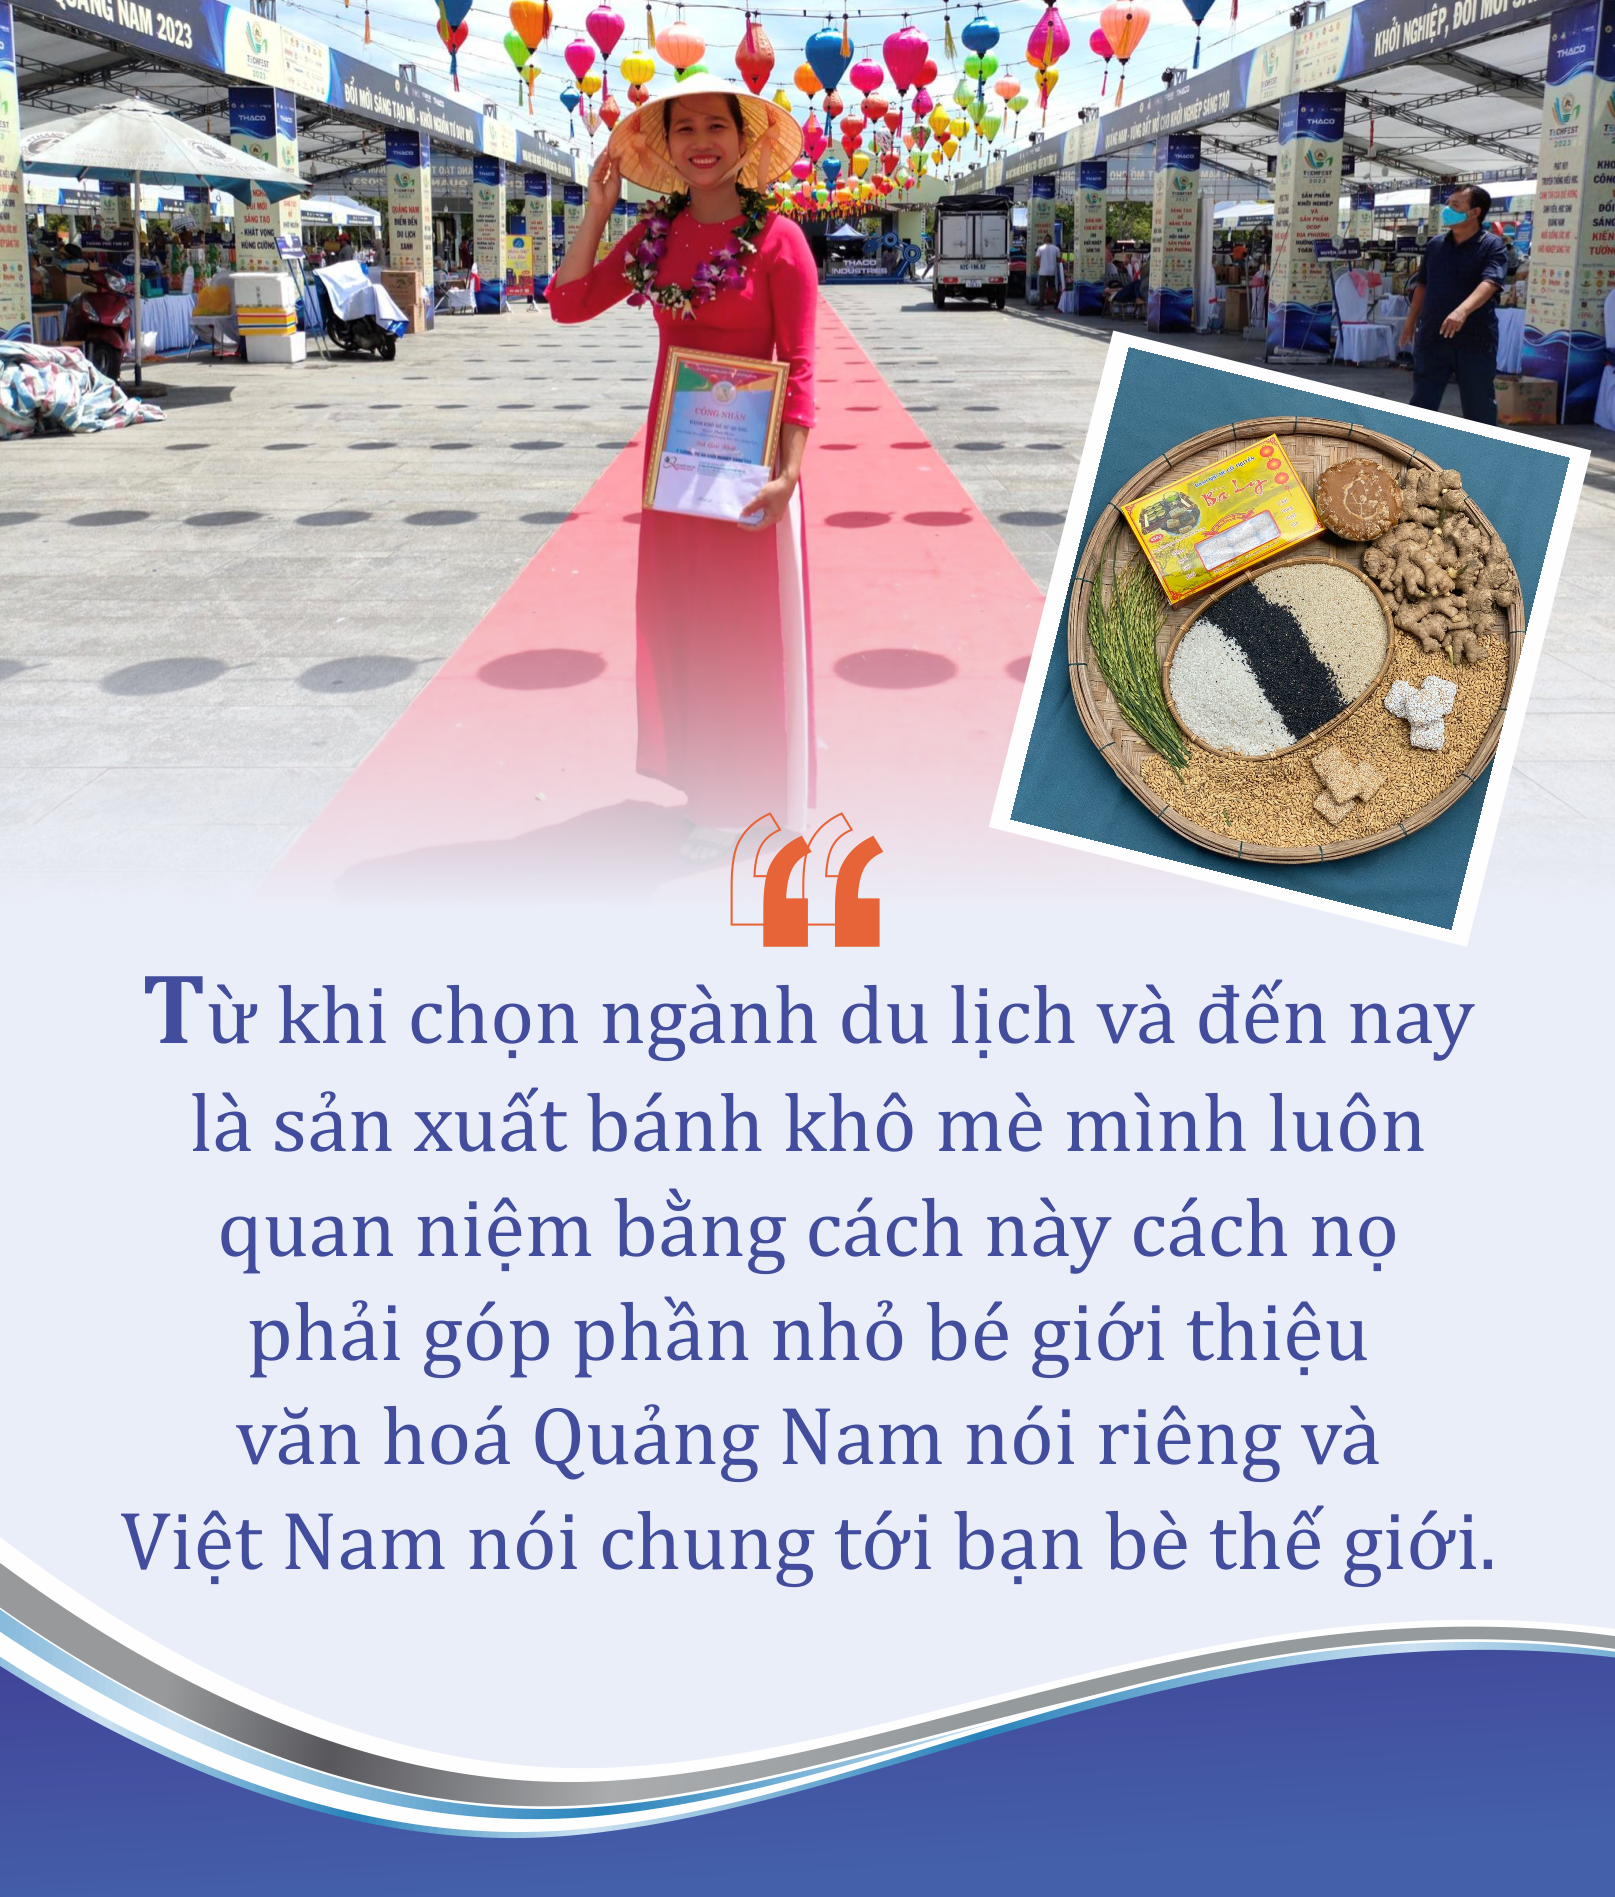 Phan Thi Ly and her product ‘banh me kho’